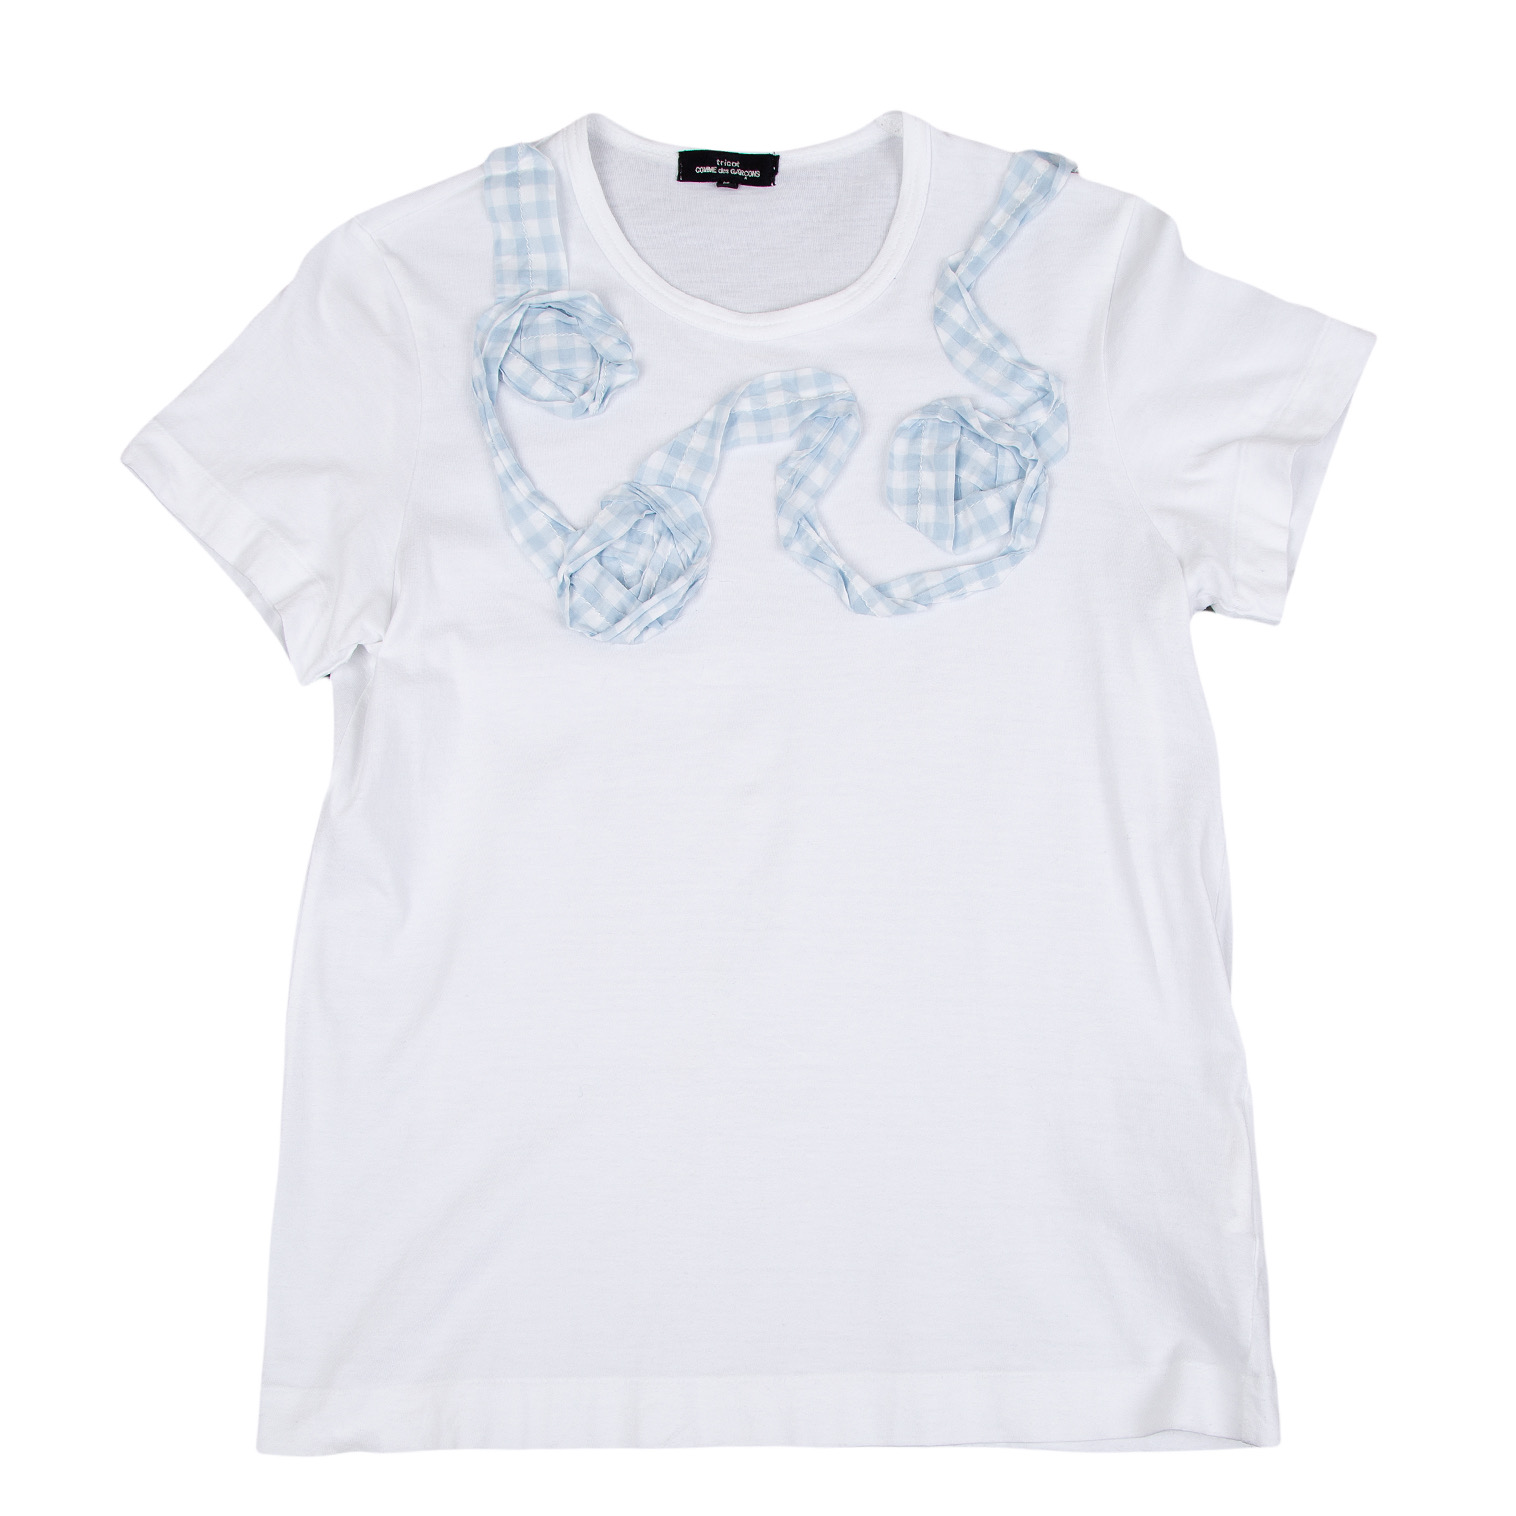 tricot comme des garcons Tシャツ新品値引き